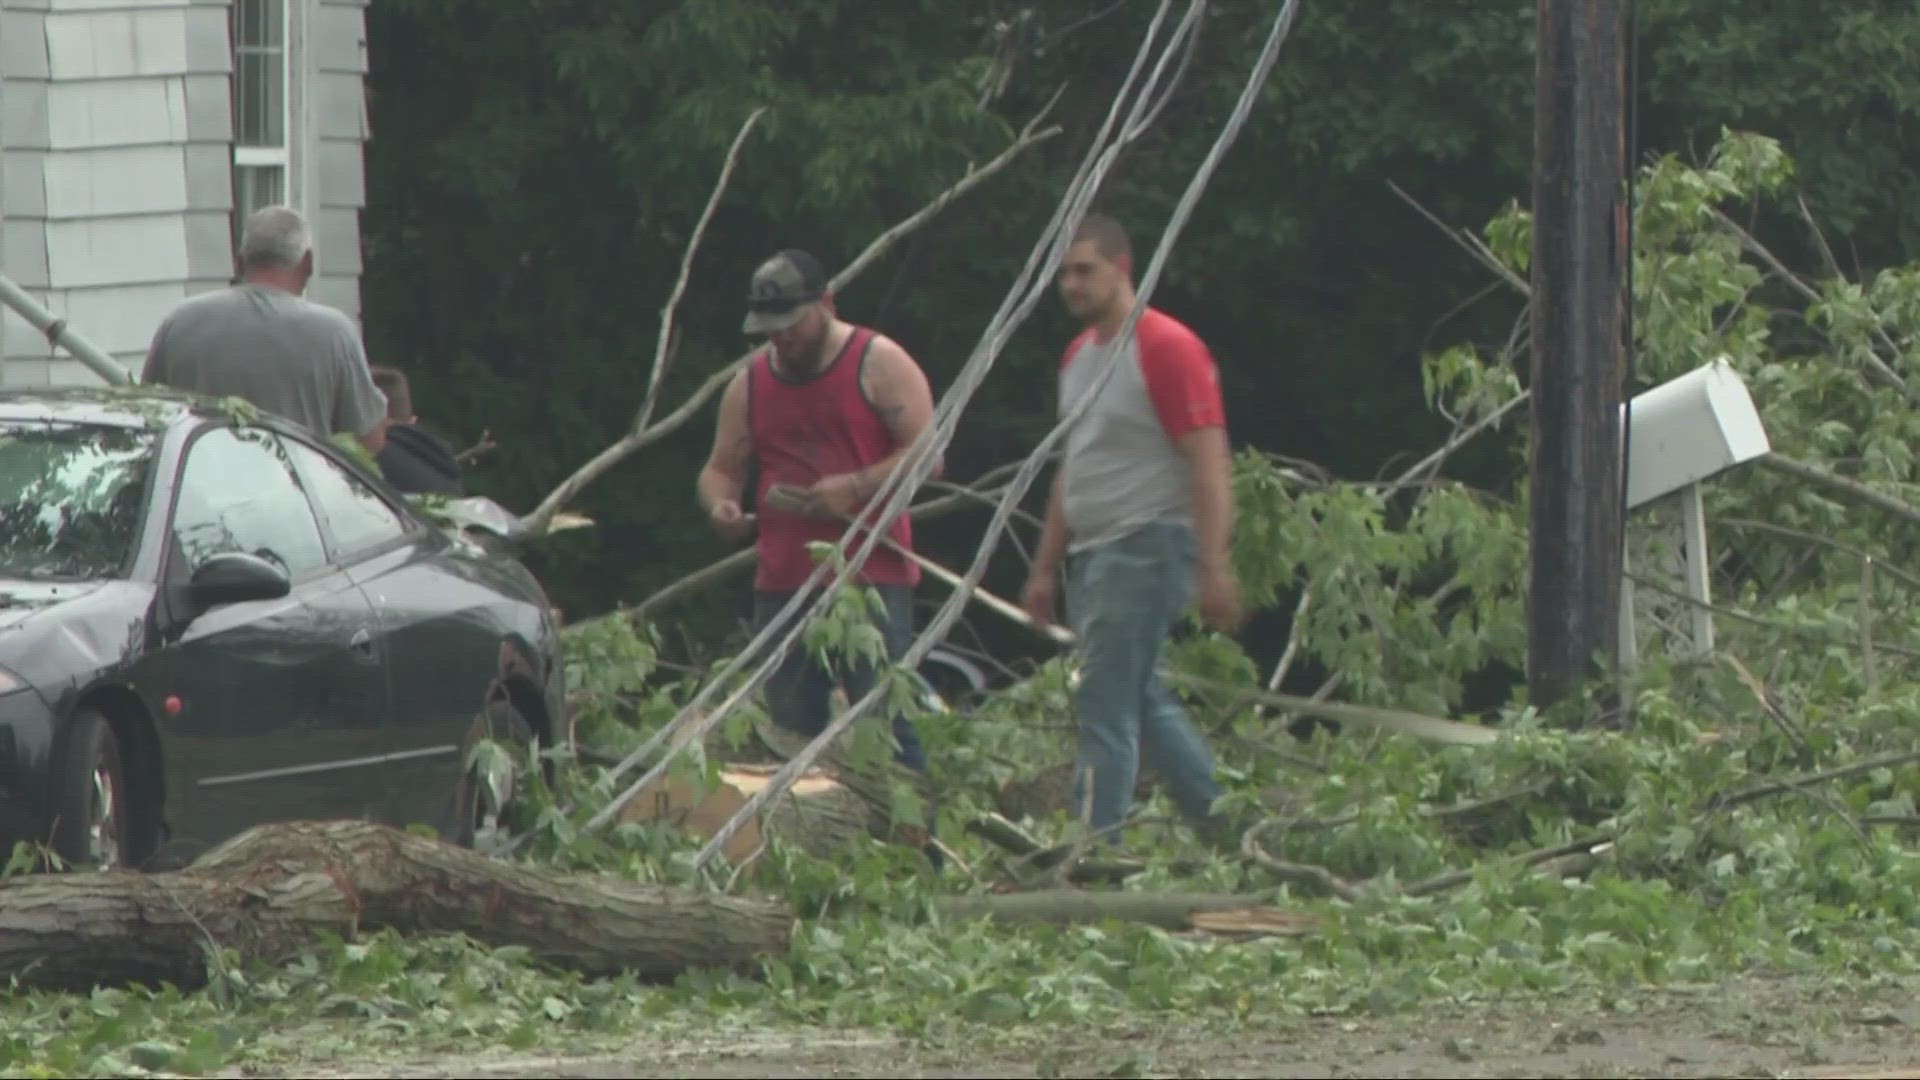 Residents are now dealing with power outages and the difficult work of cleaning up.